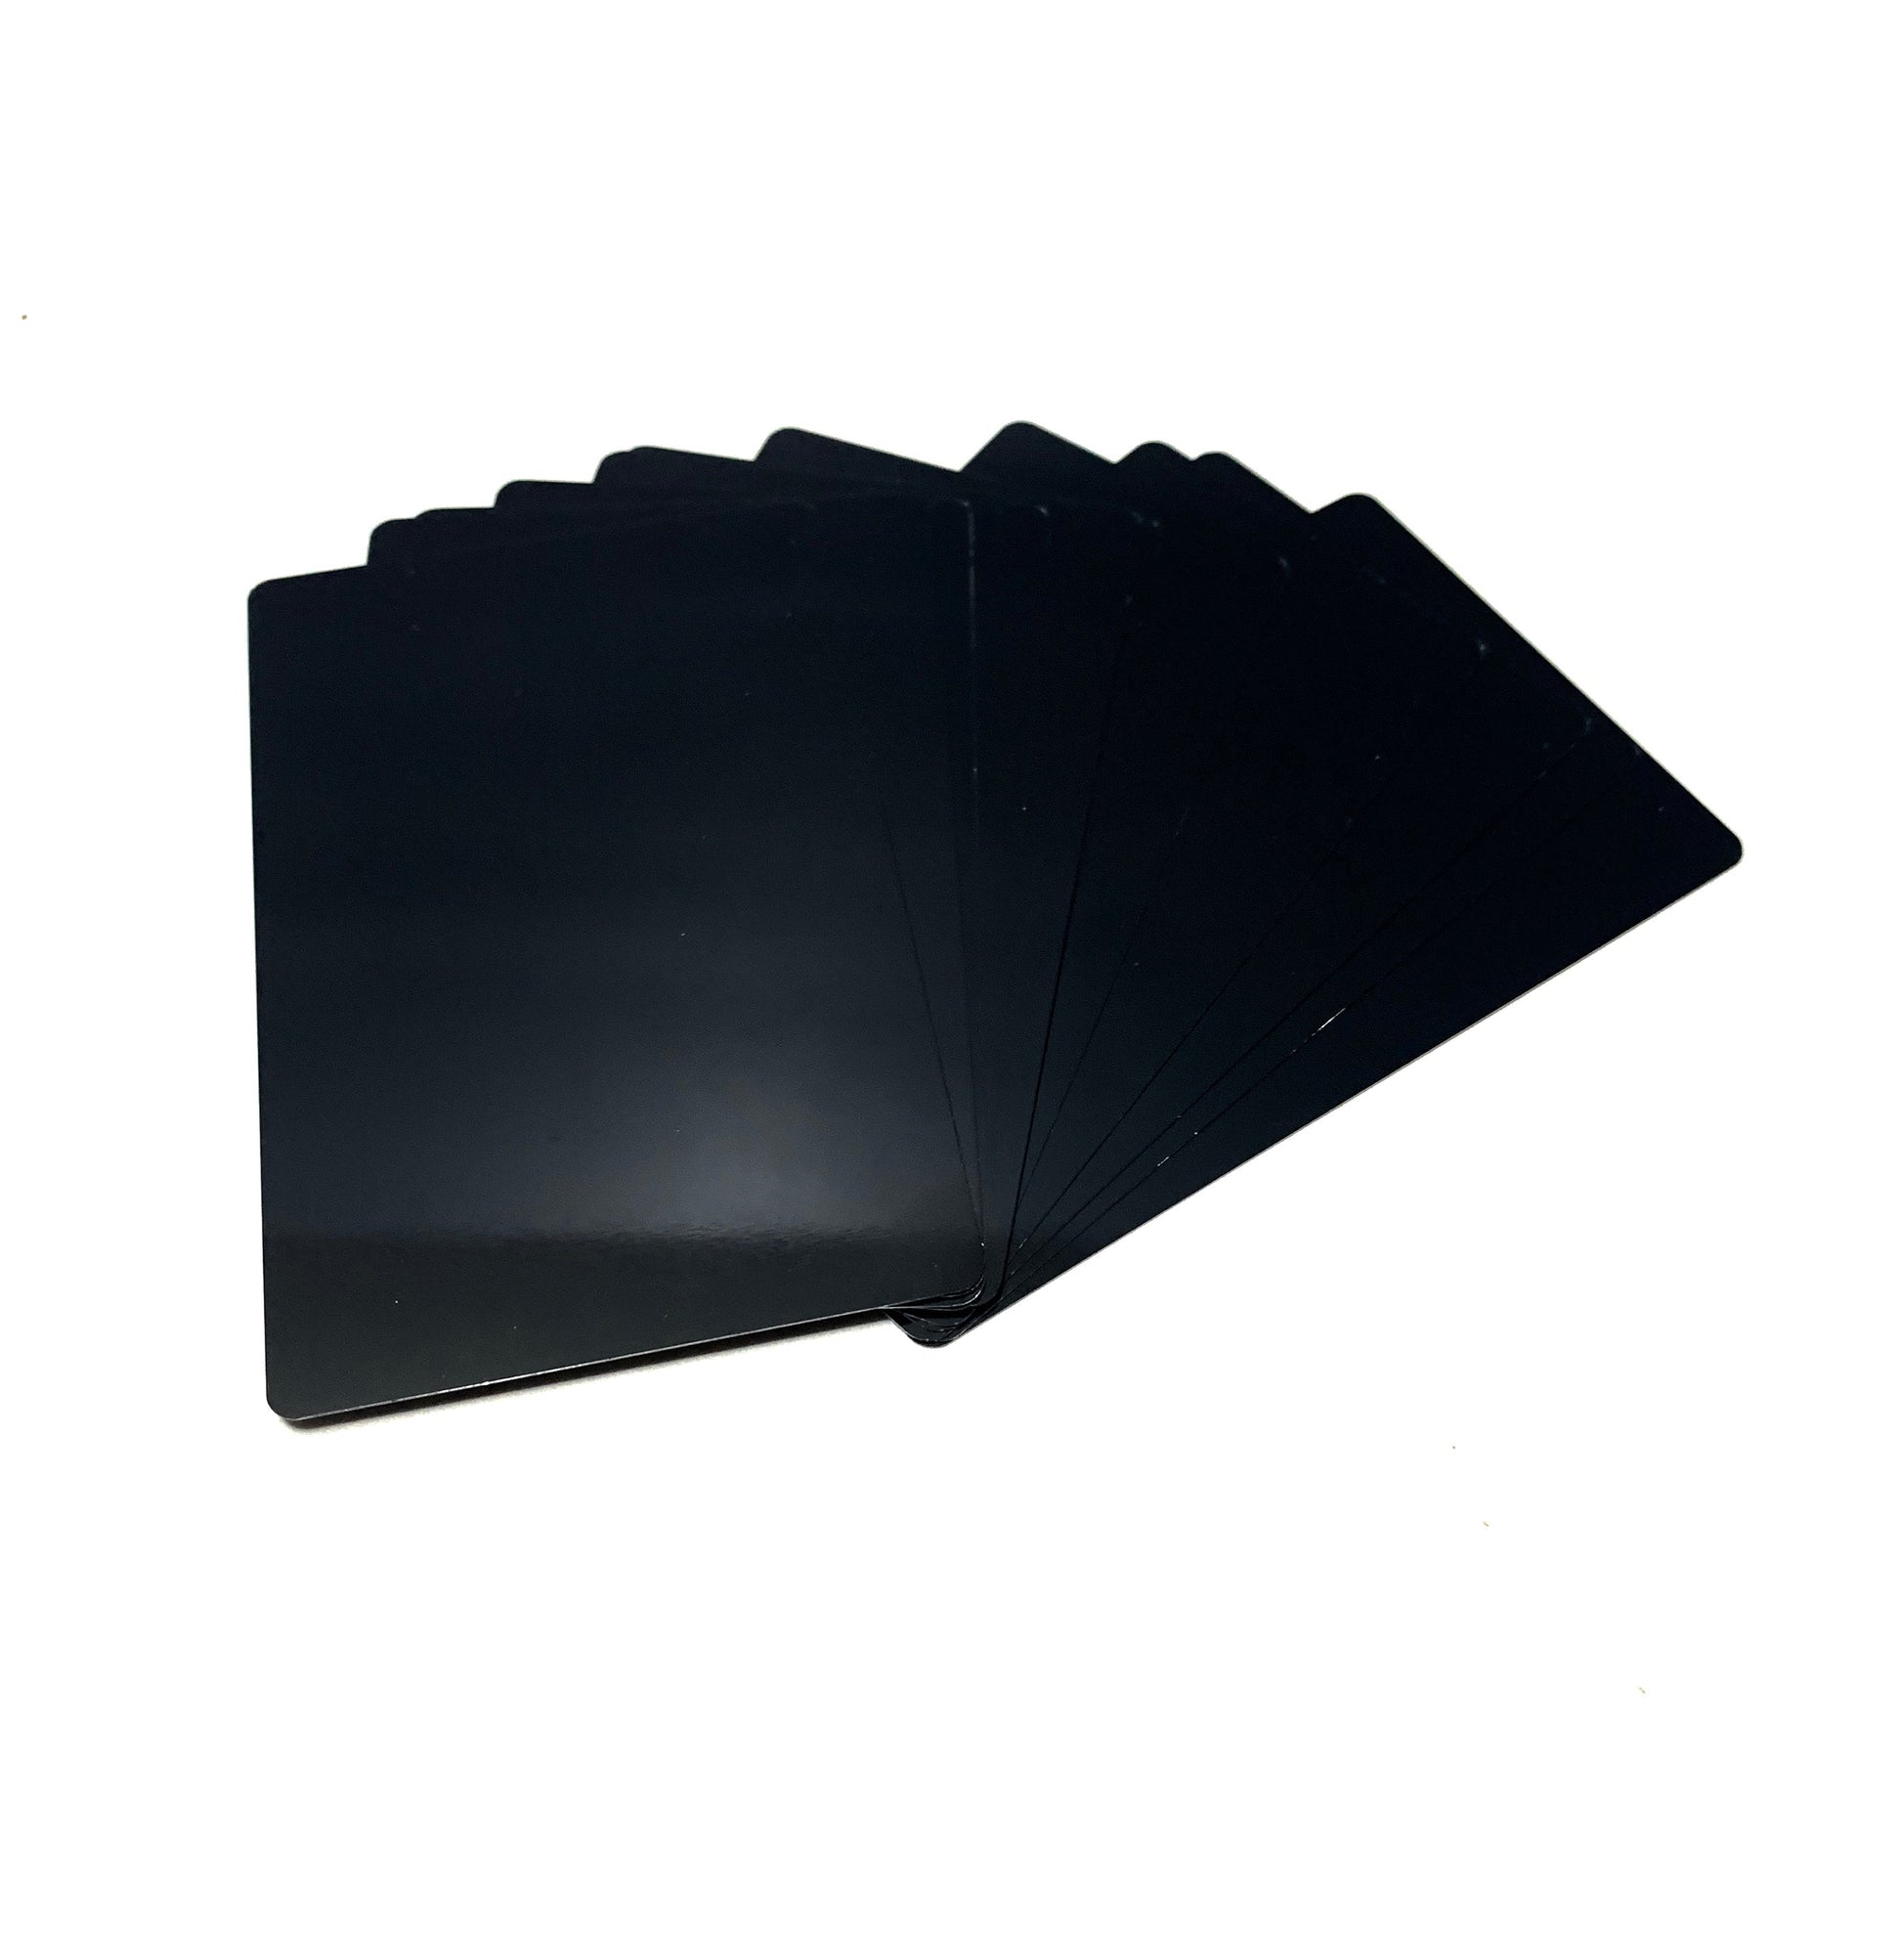 Business Card Size Anodized Aluminum Metal Blanks 2 x 3.55 x 0.04 1mm  Thick (Pack of 10)